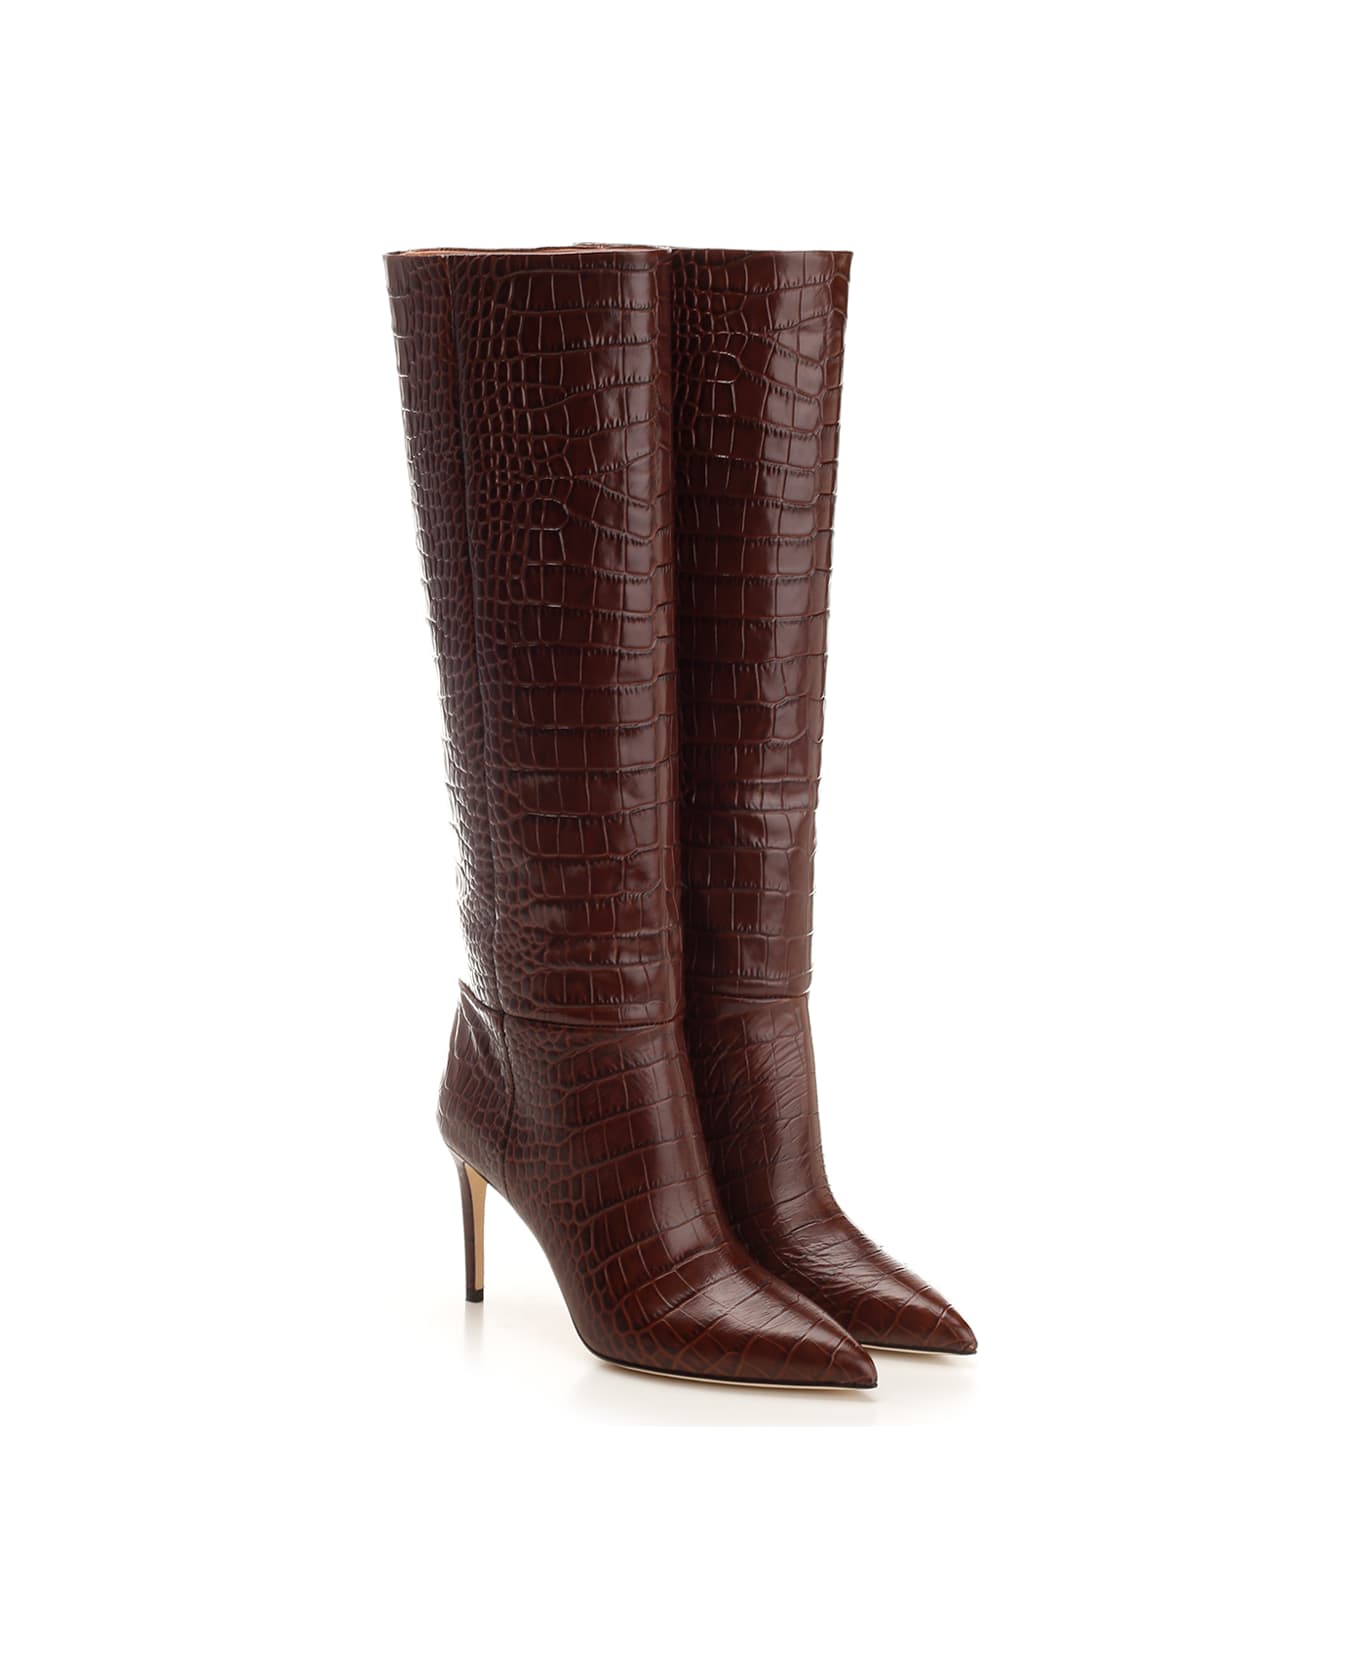 Paris Texas Embossed Leather Boots - BROWN ブーツ